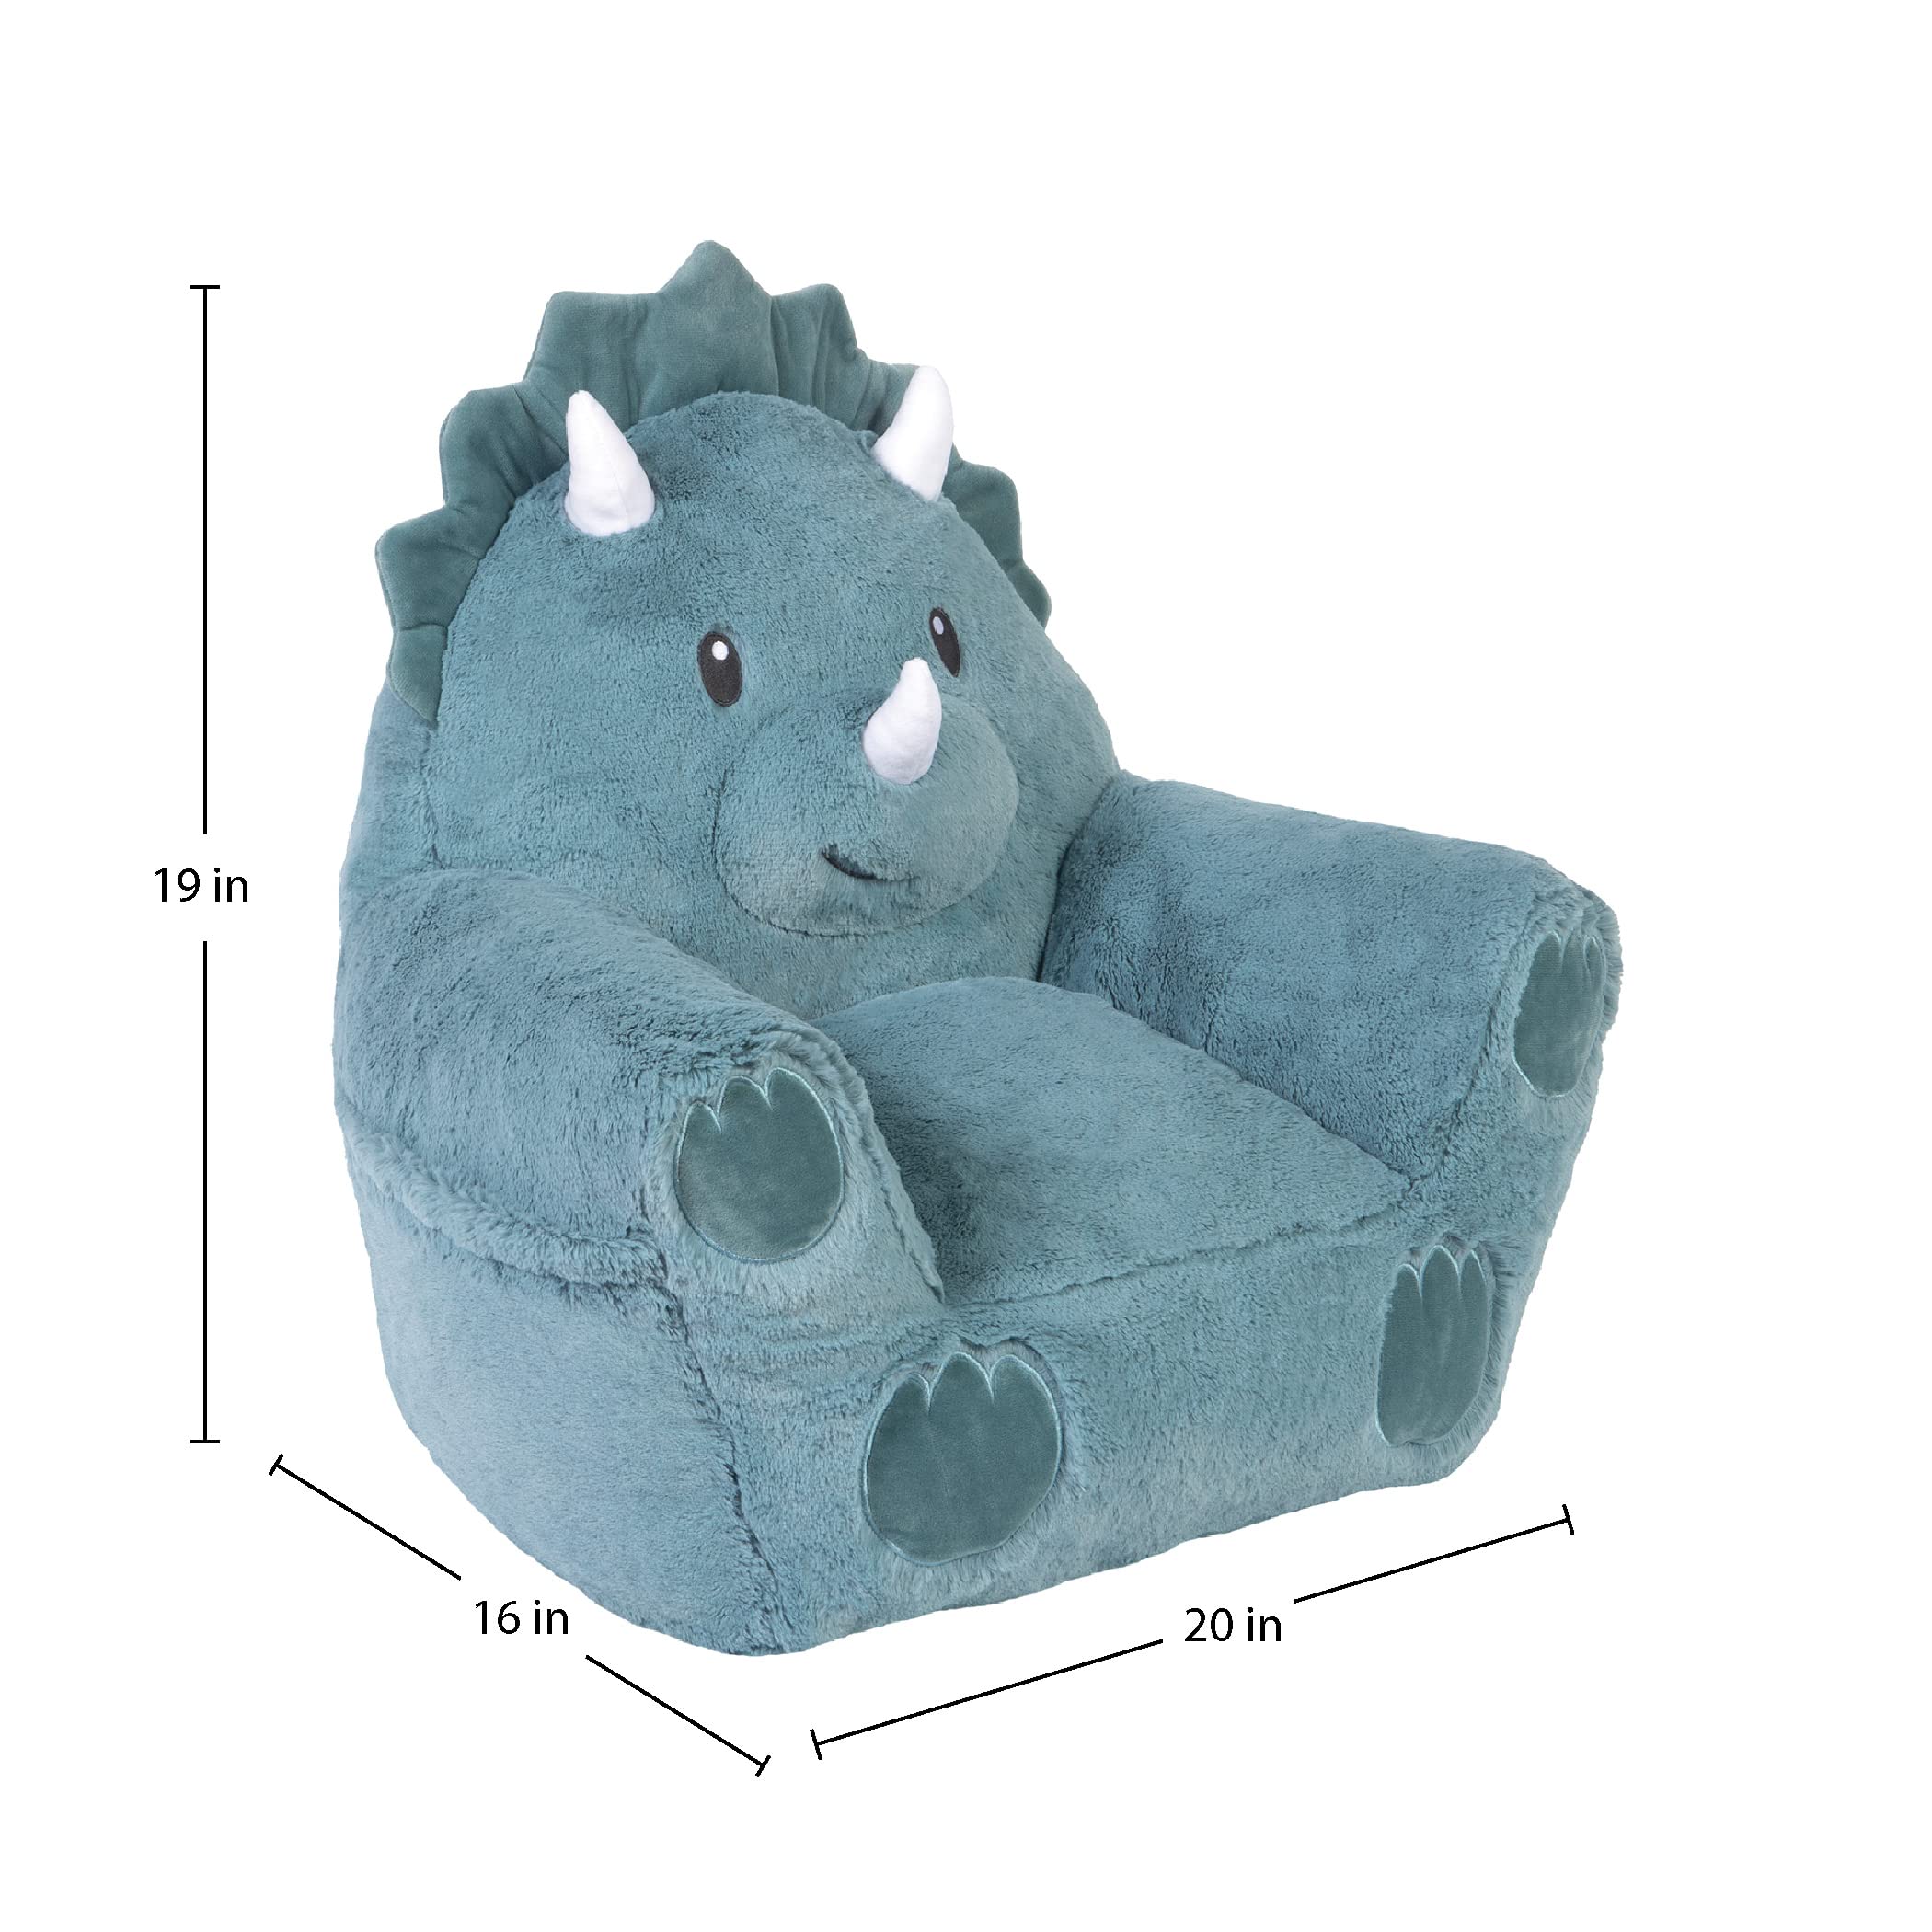 Cuddo Buddy Character Chair for Toddlers 12-36 months – Dinosaur, Plush